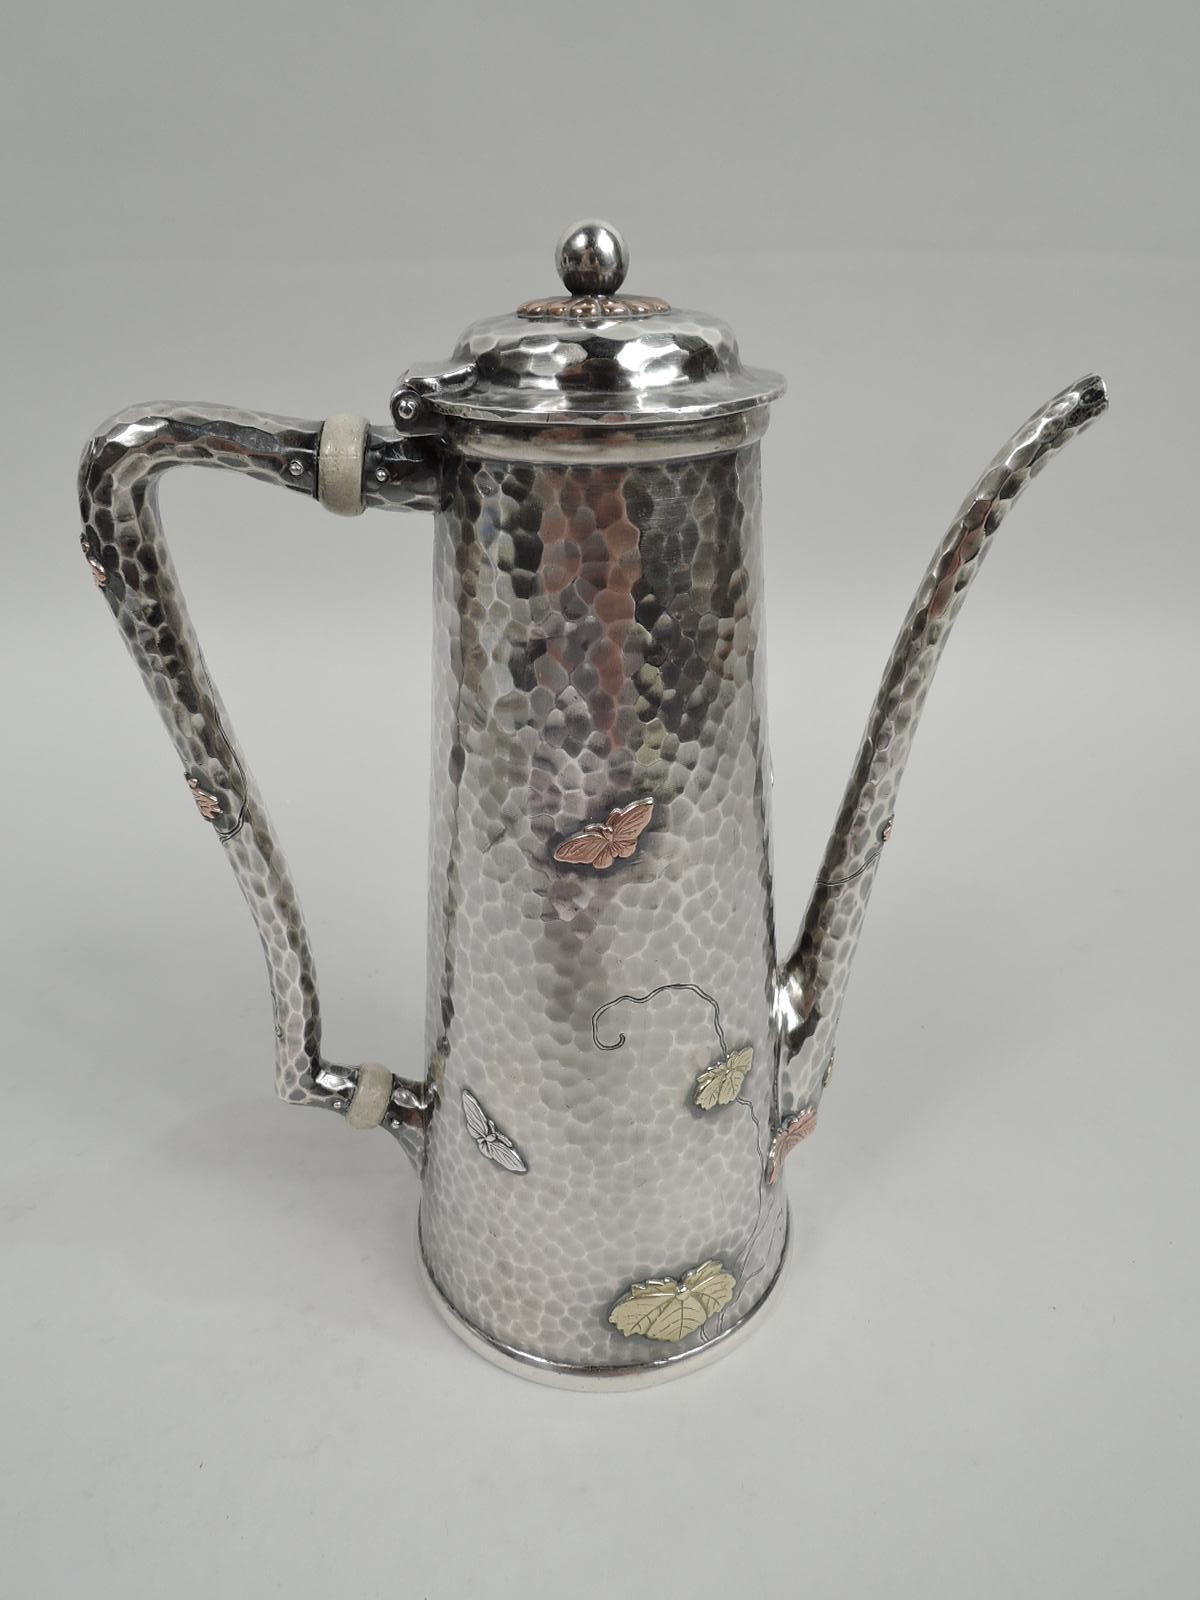 Japonesque mixed metal on sterling silver coffeepot. Made by Tiffany & Co. in New York, ca 1878. Truncated cone with gently scrolled bracket handle, tapering spout, and hinged and domed cover. Applied butterflies and leaves on engraved tendrils as